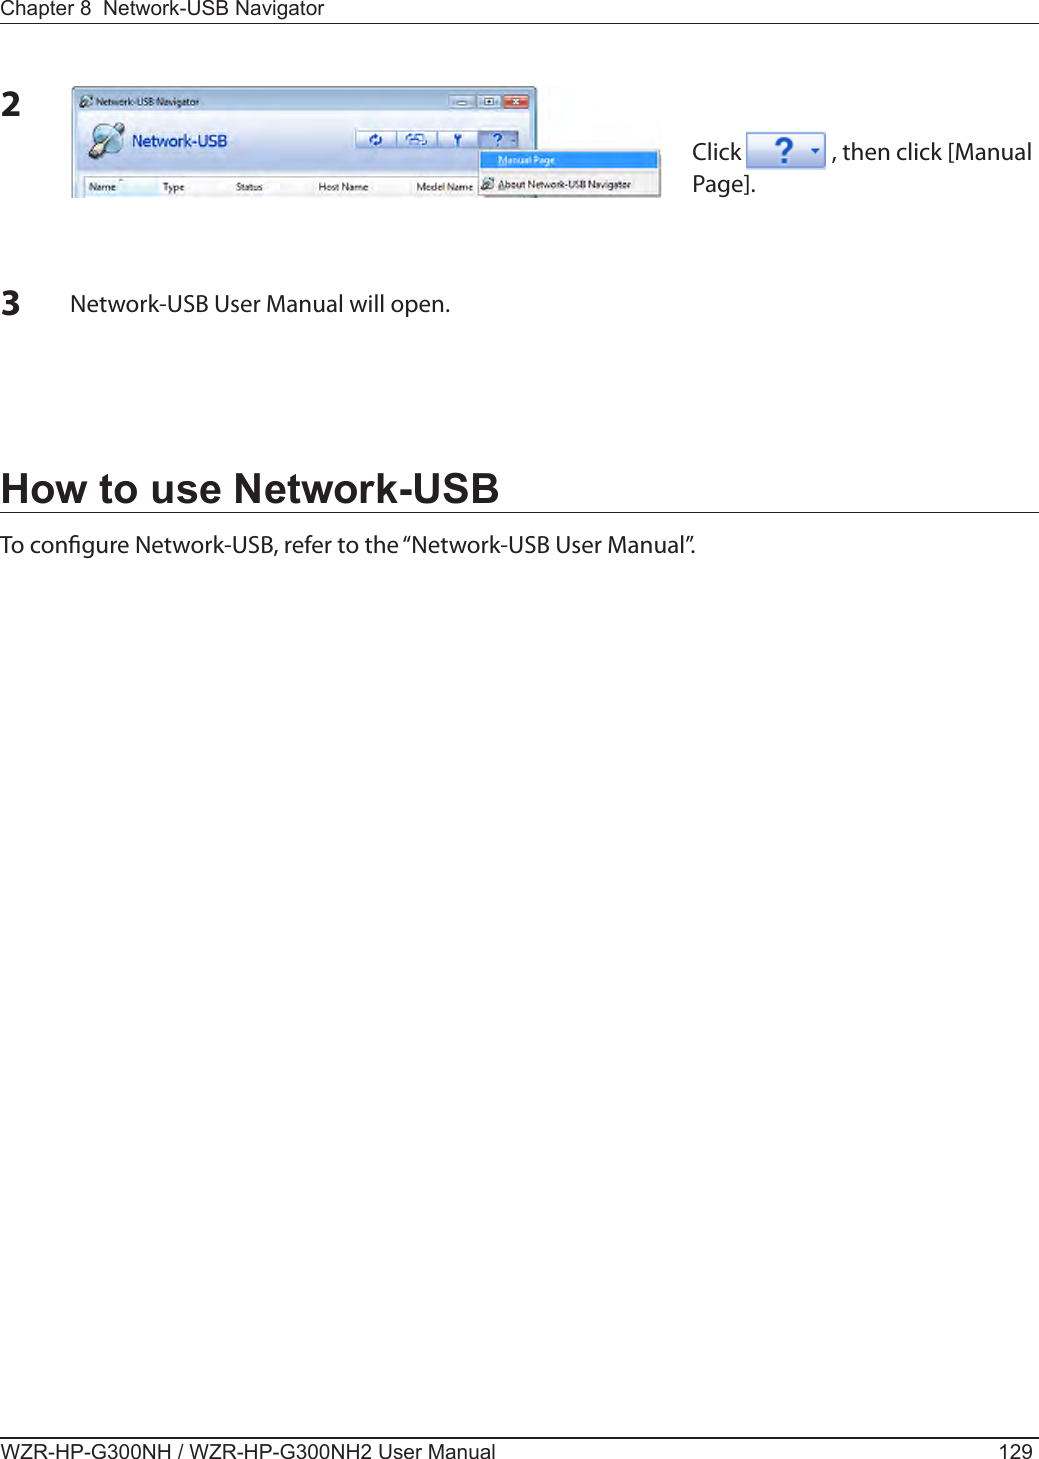 Chapter 8  Network-USB NavigatorWZR-HP-G300NH / WZR-HP-G300NH2 User Manual 129How to use Network-USBTo congure Network-USB, refer to the “Network-USB User Manual”.2Click   , then click [Manual Page]. 3Network-USB User Manual will open.